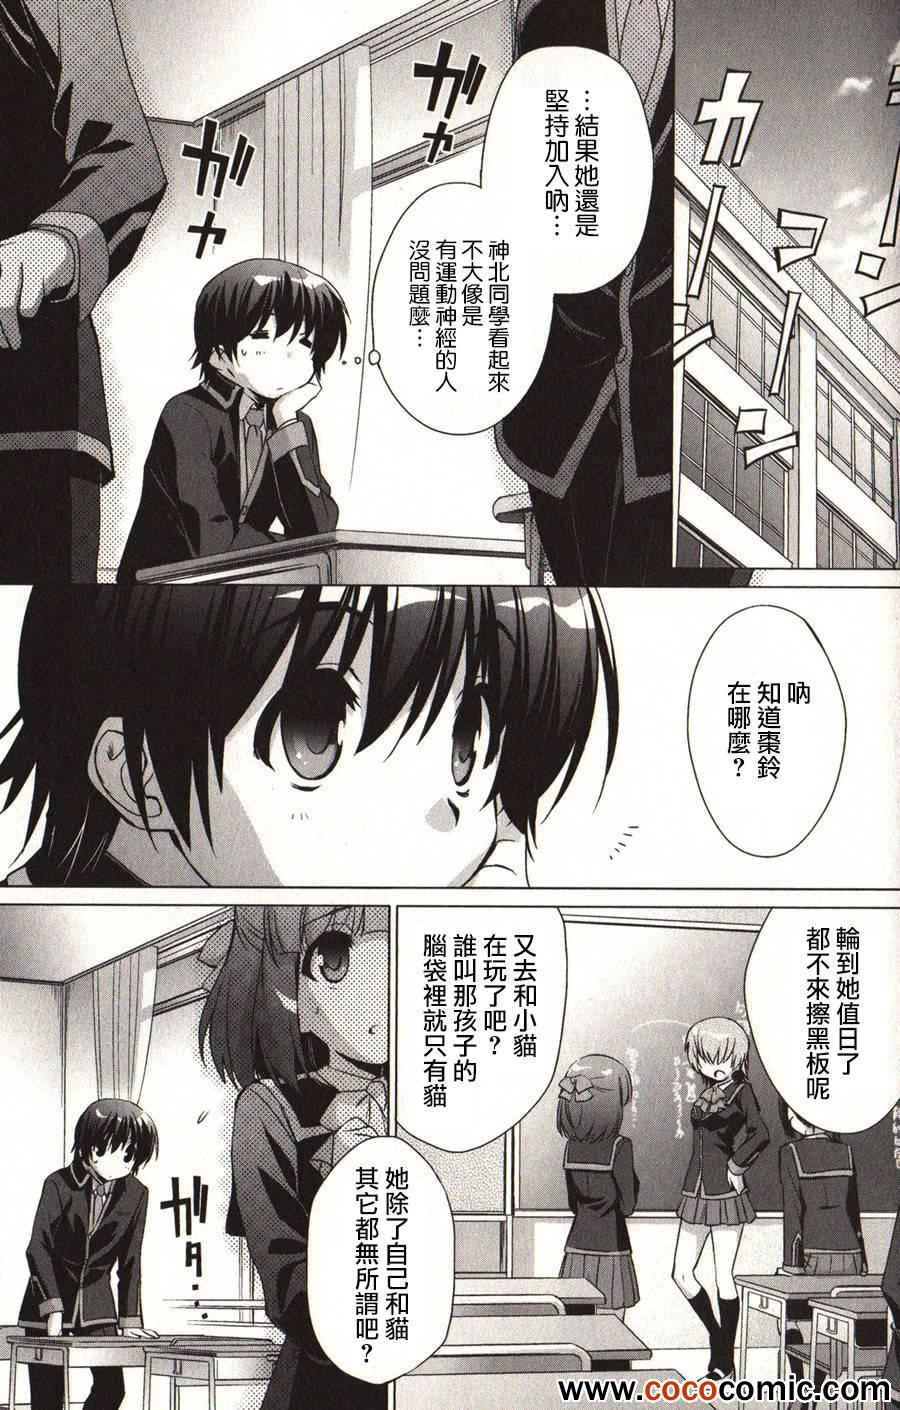 《Little Busters! End of Refrain》漫画 End of Refrain 003集